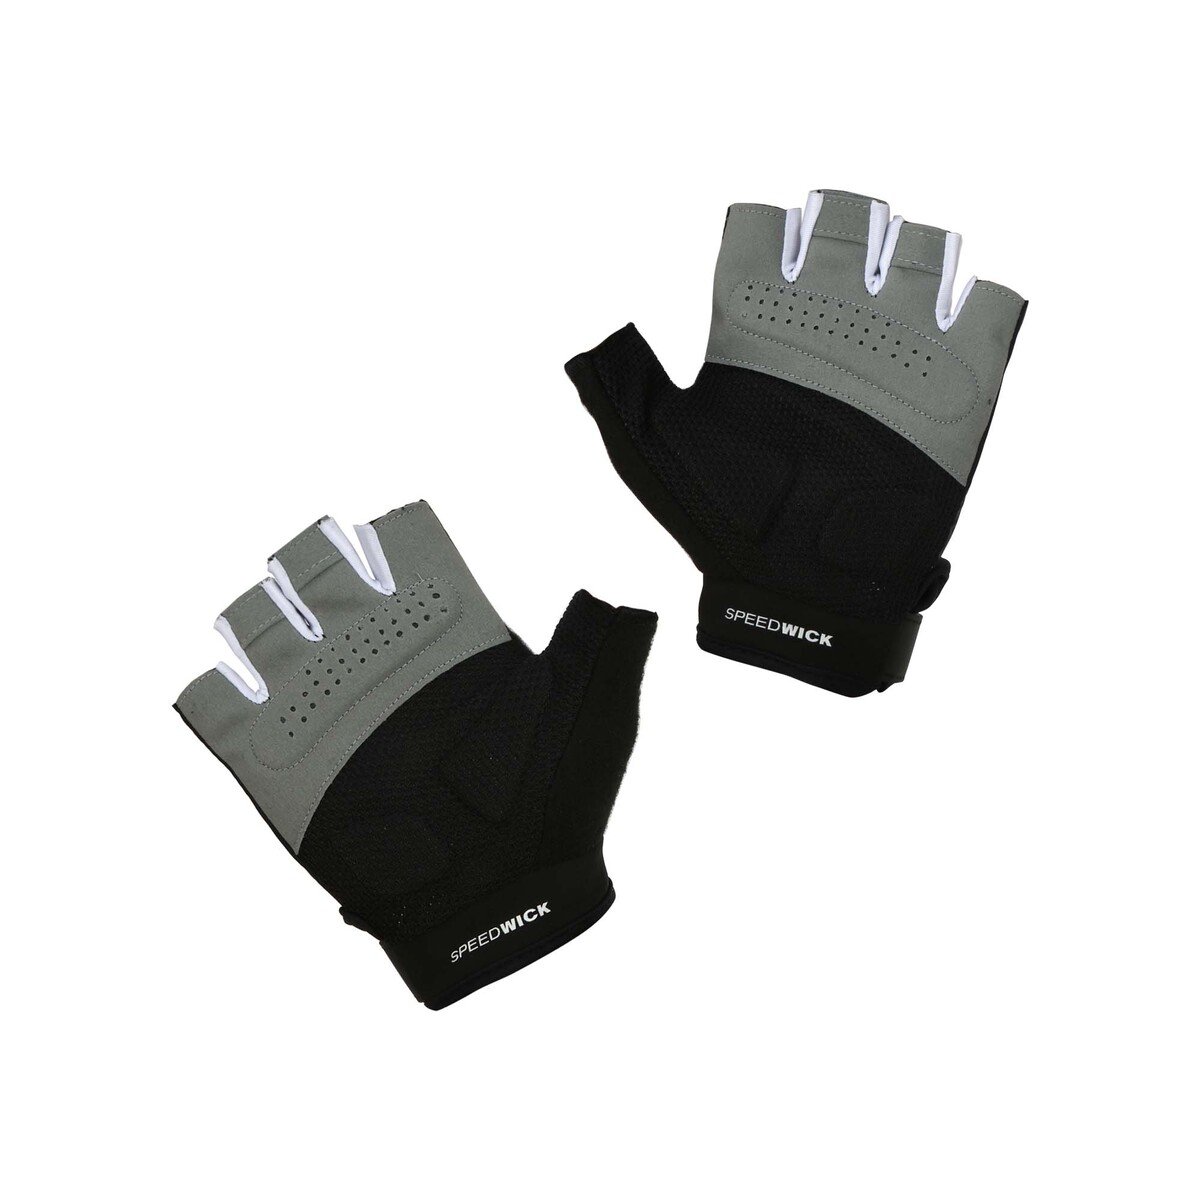 Reebok Fitness Gloves - Extra Large RAGB-14516